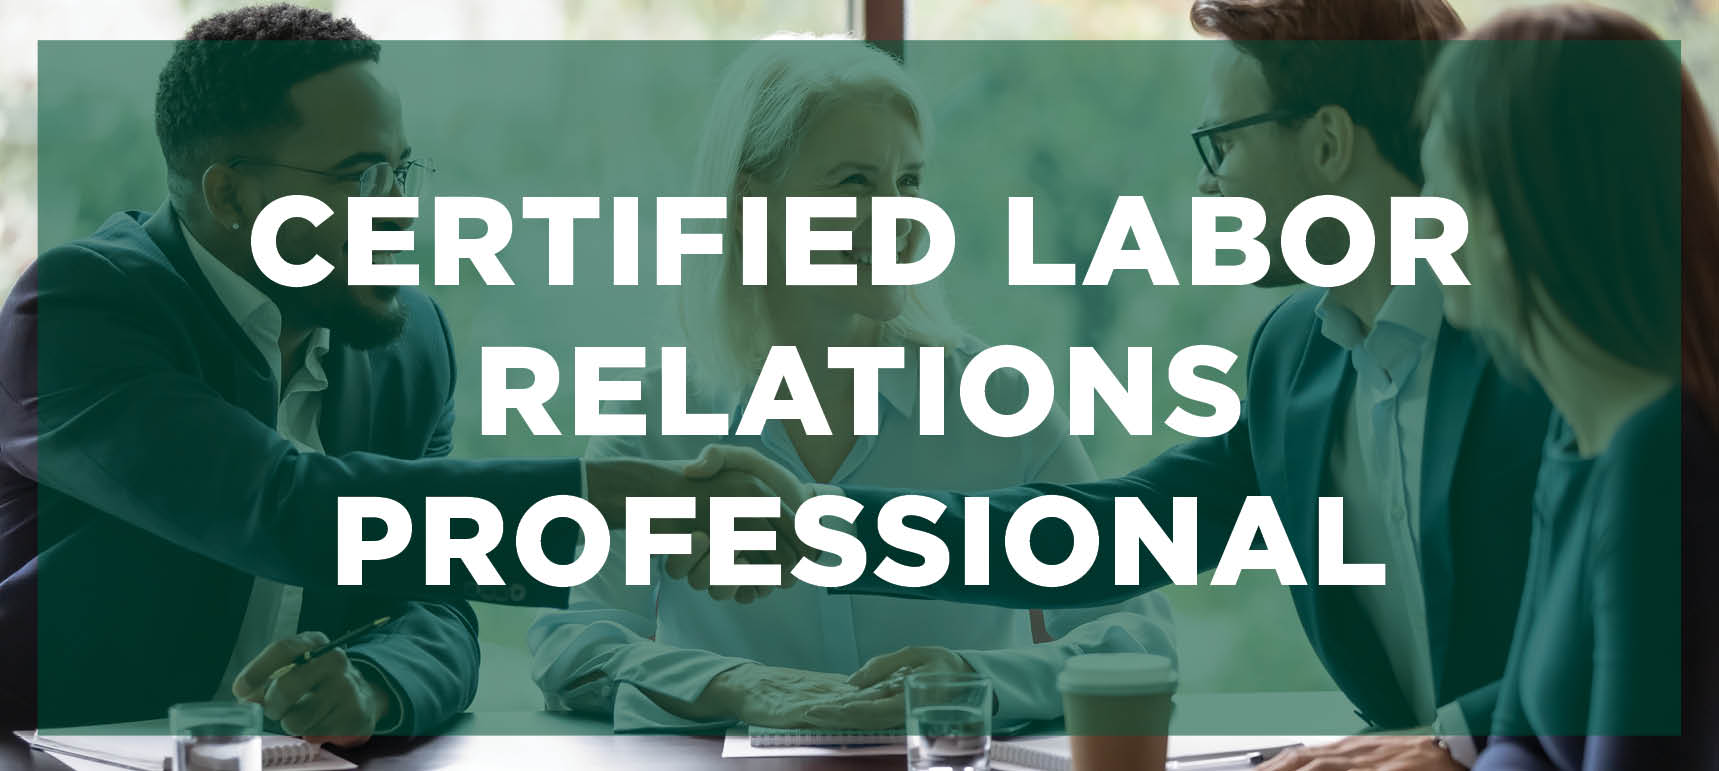 Certified Labor Relations Professional